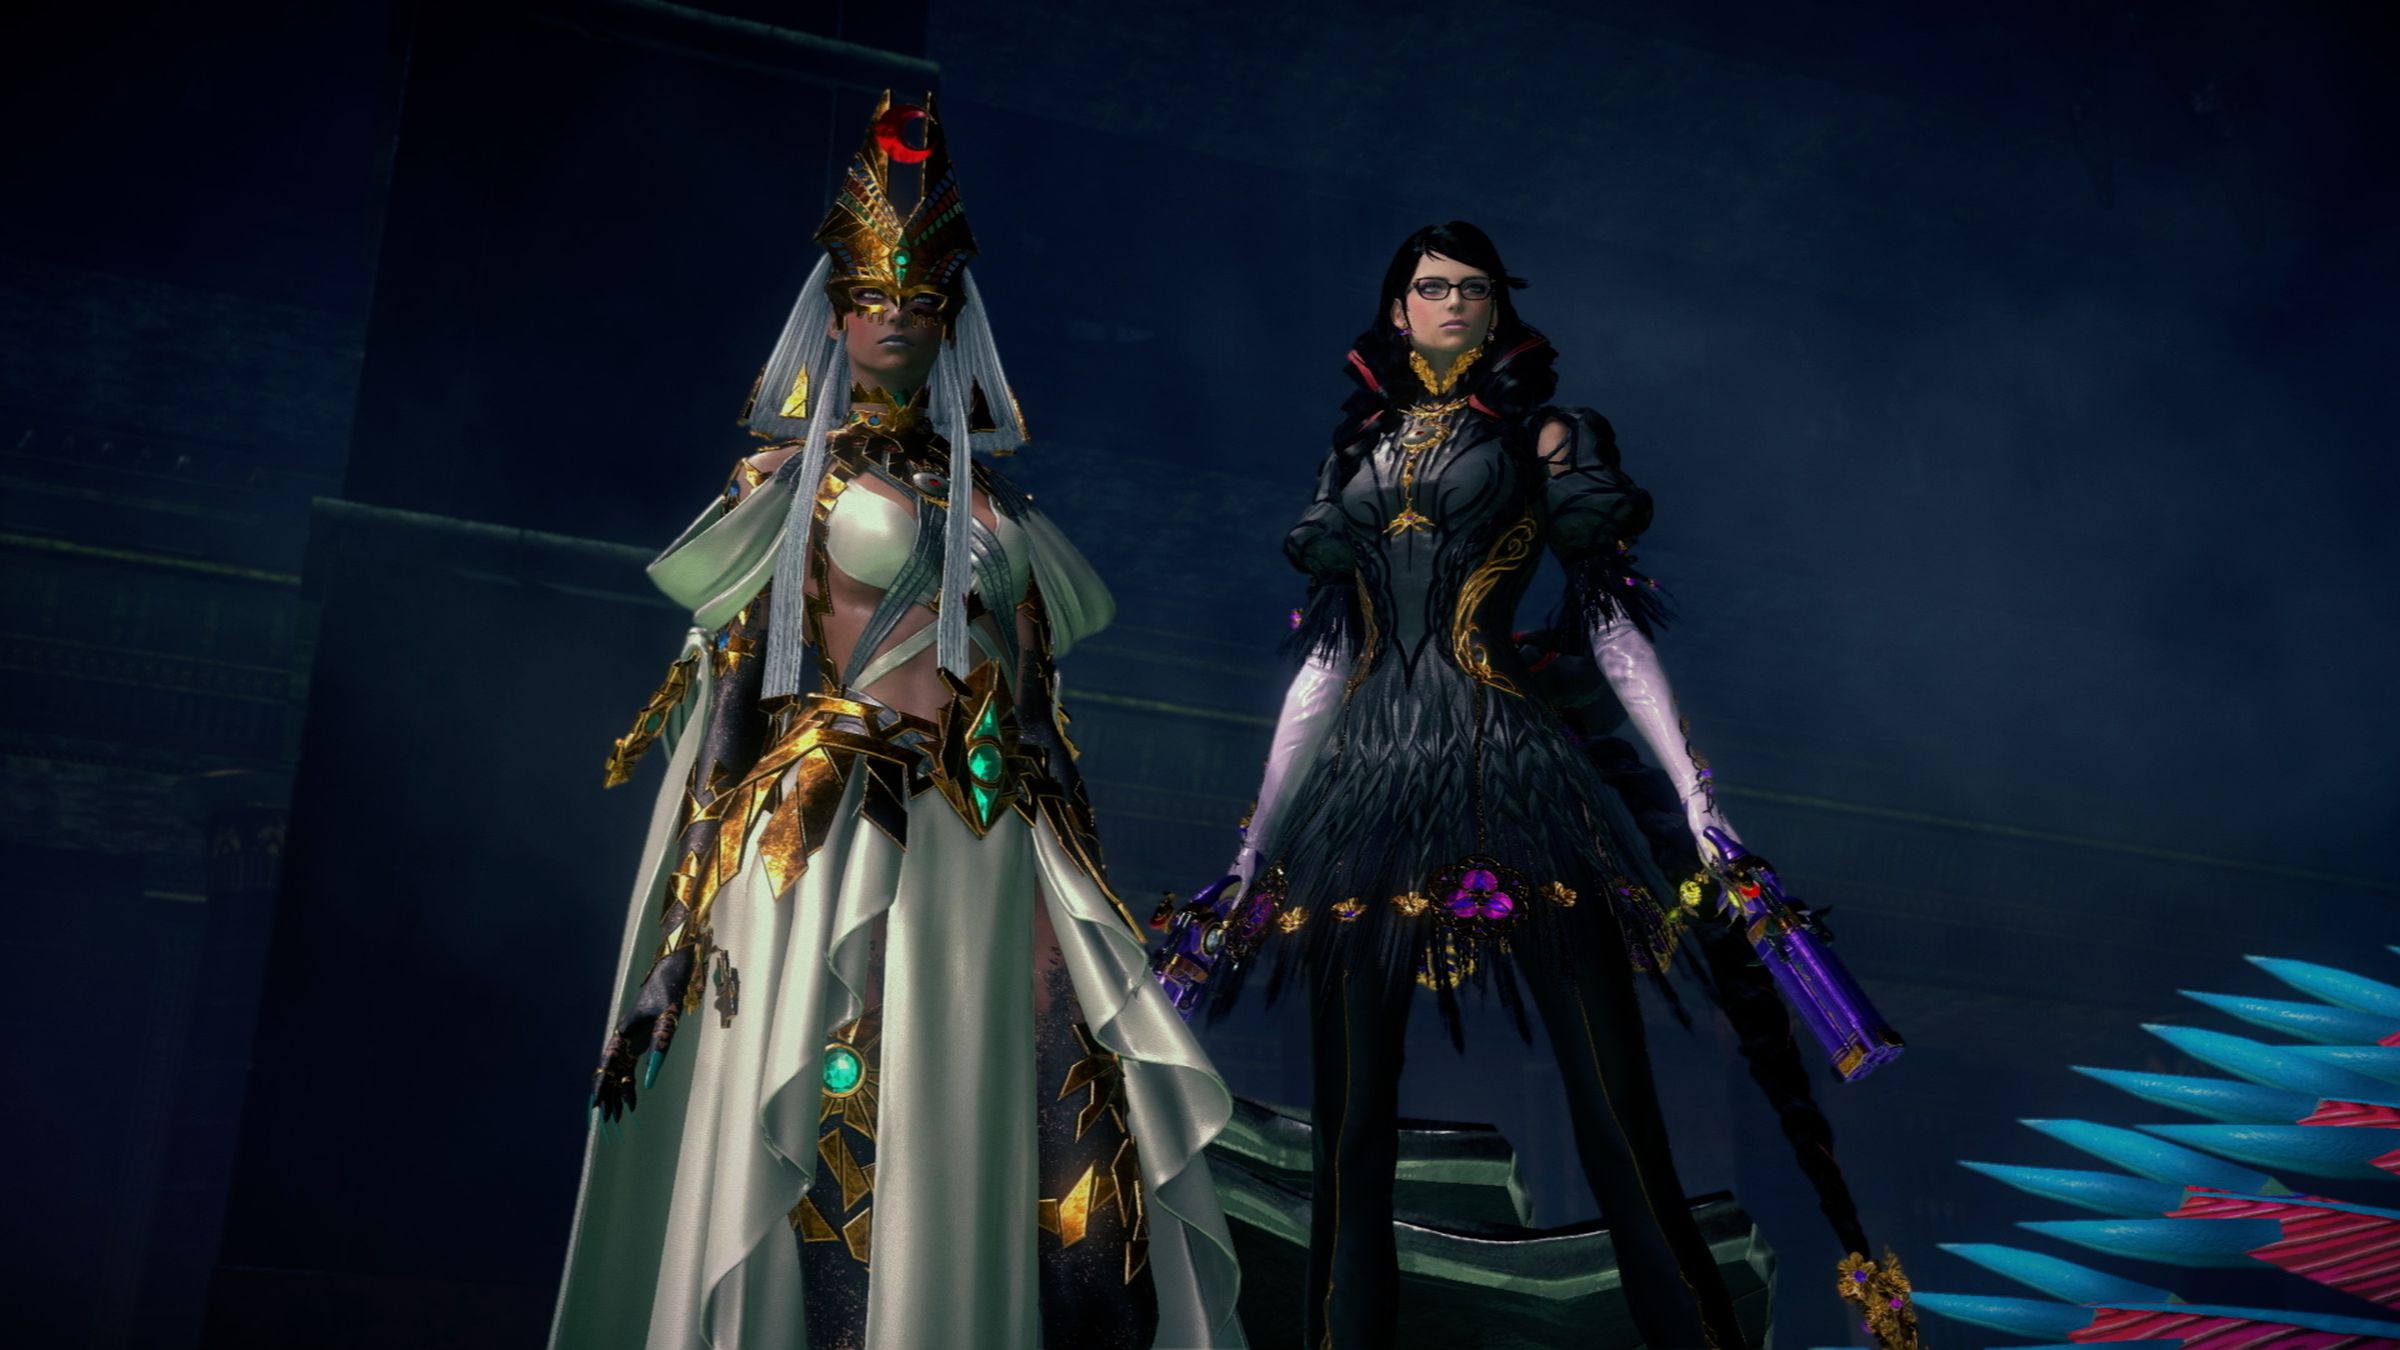 Meeting Bayonetta’s parallel universe counterparts featured the best, most creative moments of the game.